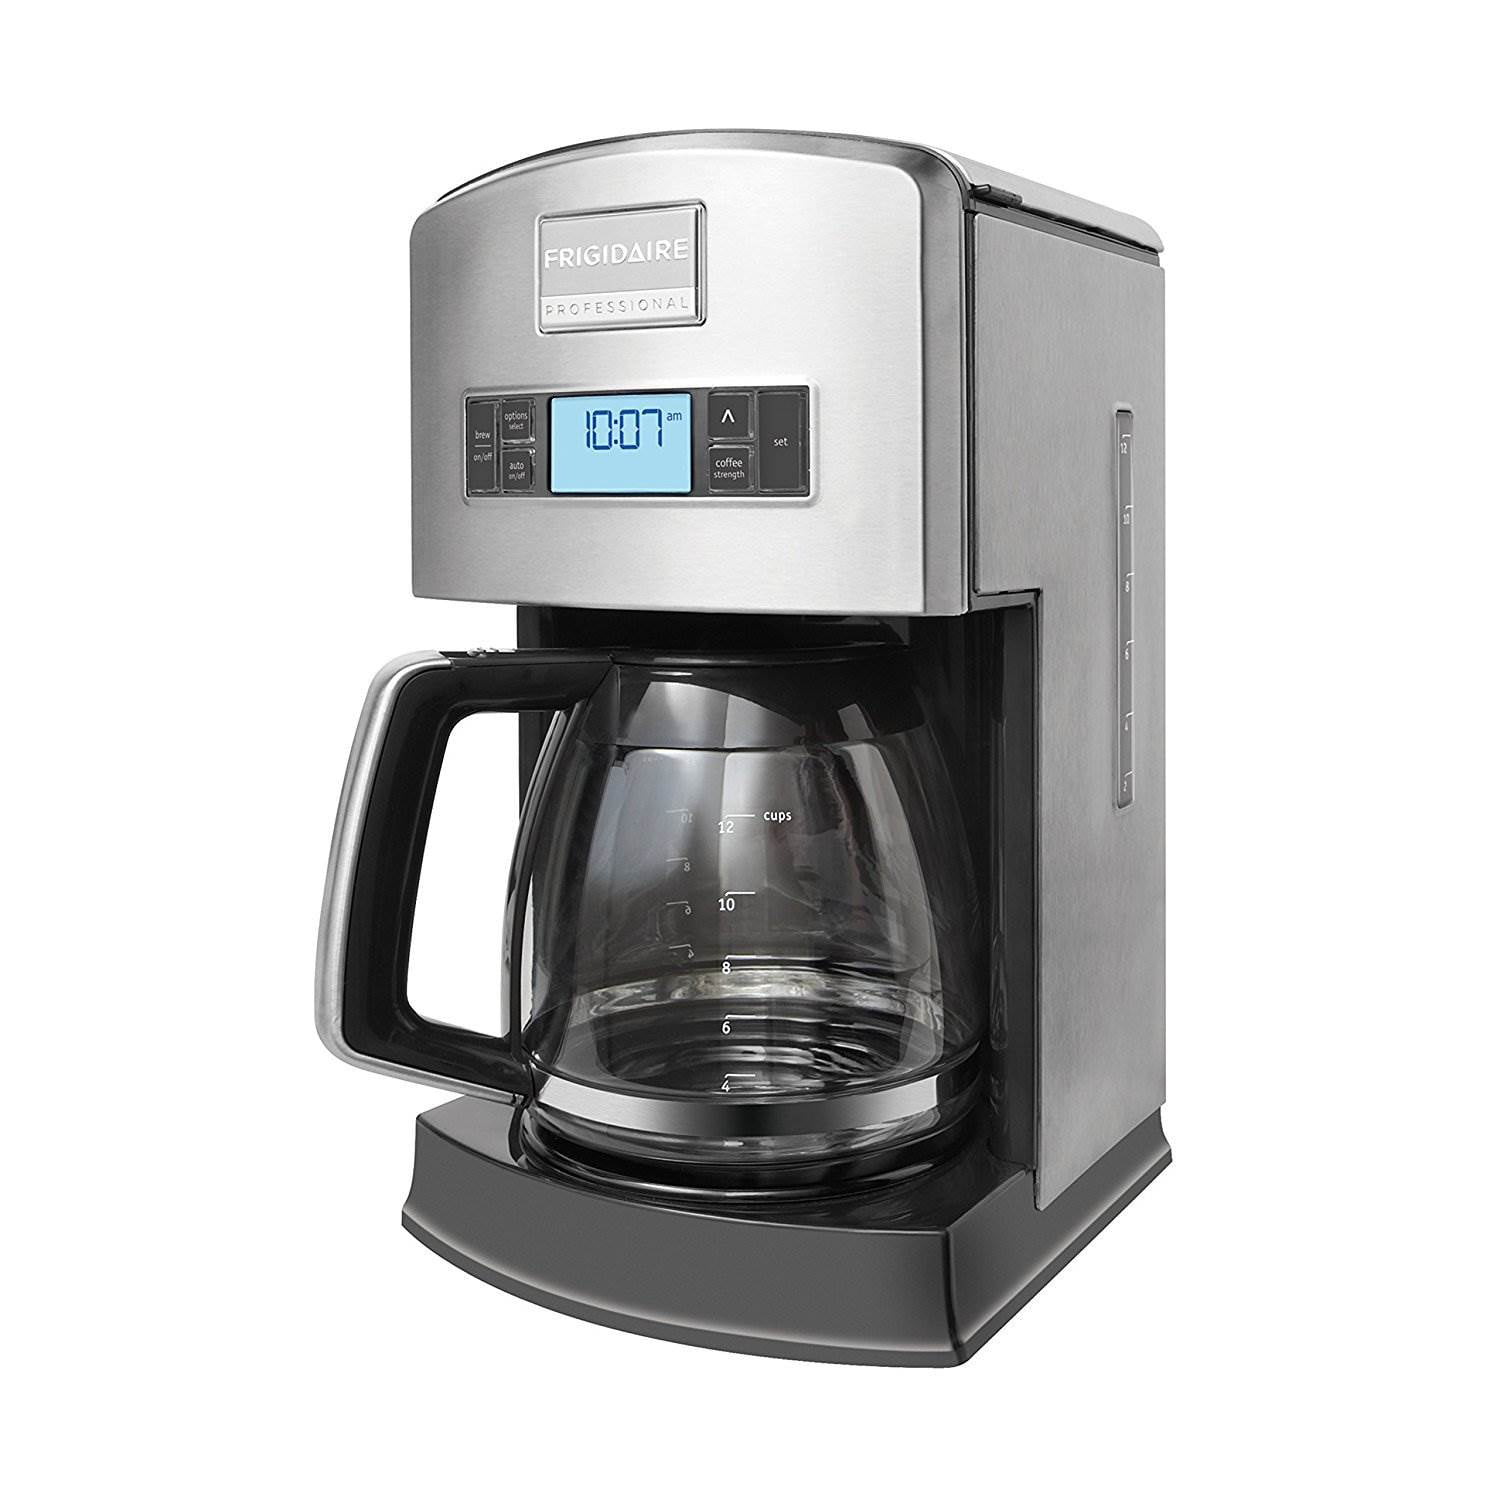 Frigidaire Professional 12 Cup Digital Stainless Steel Drip Coffee Maker